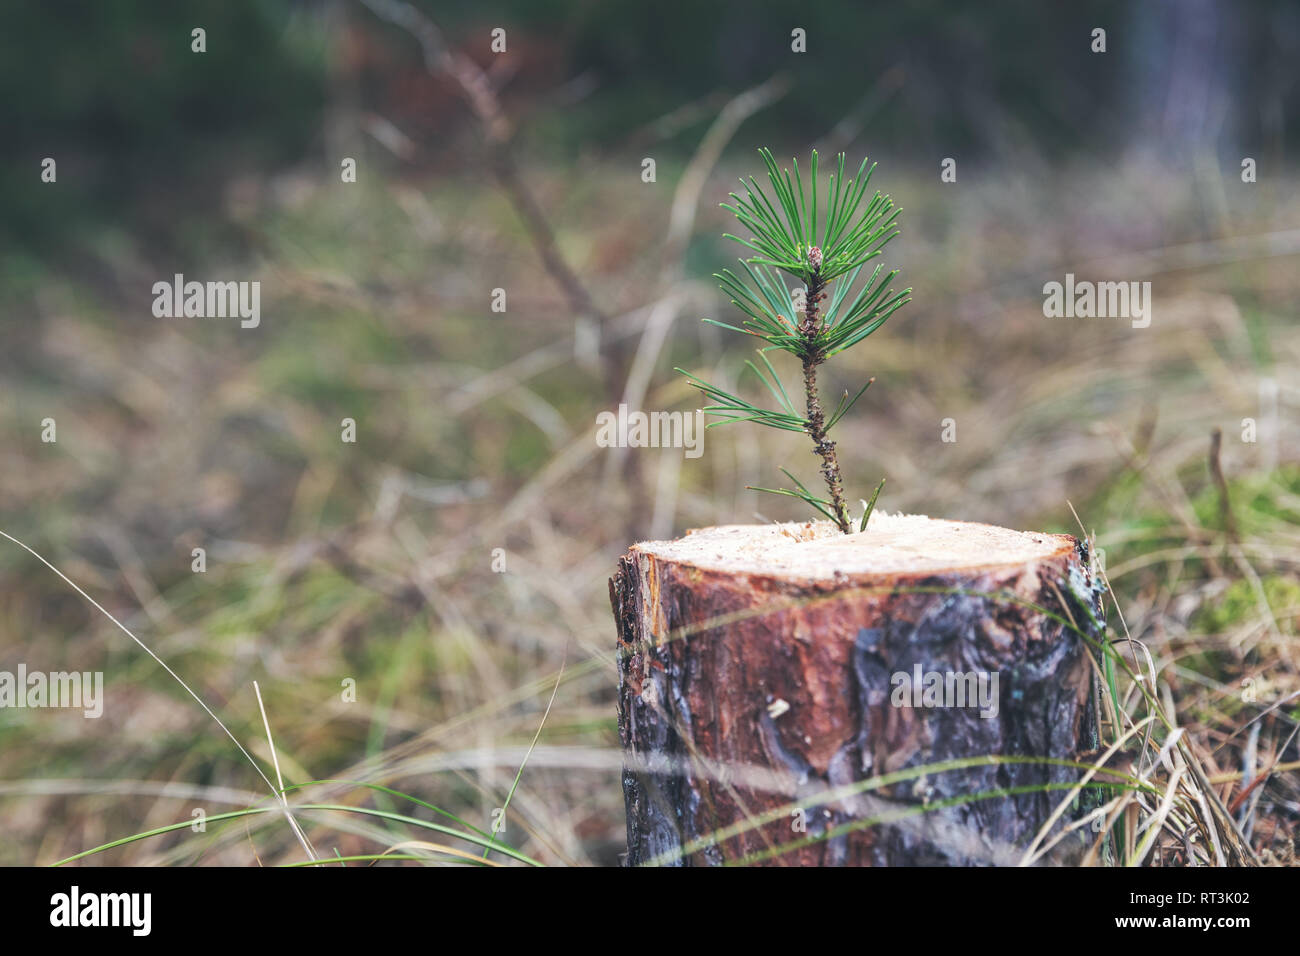 new life strenght and development concept - young pine sprout growing from tree stump Stock Photo